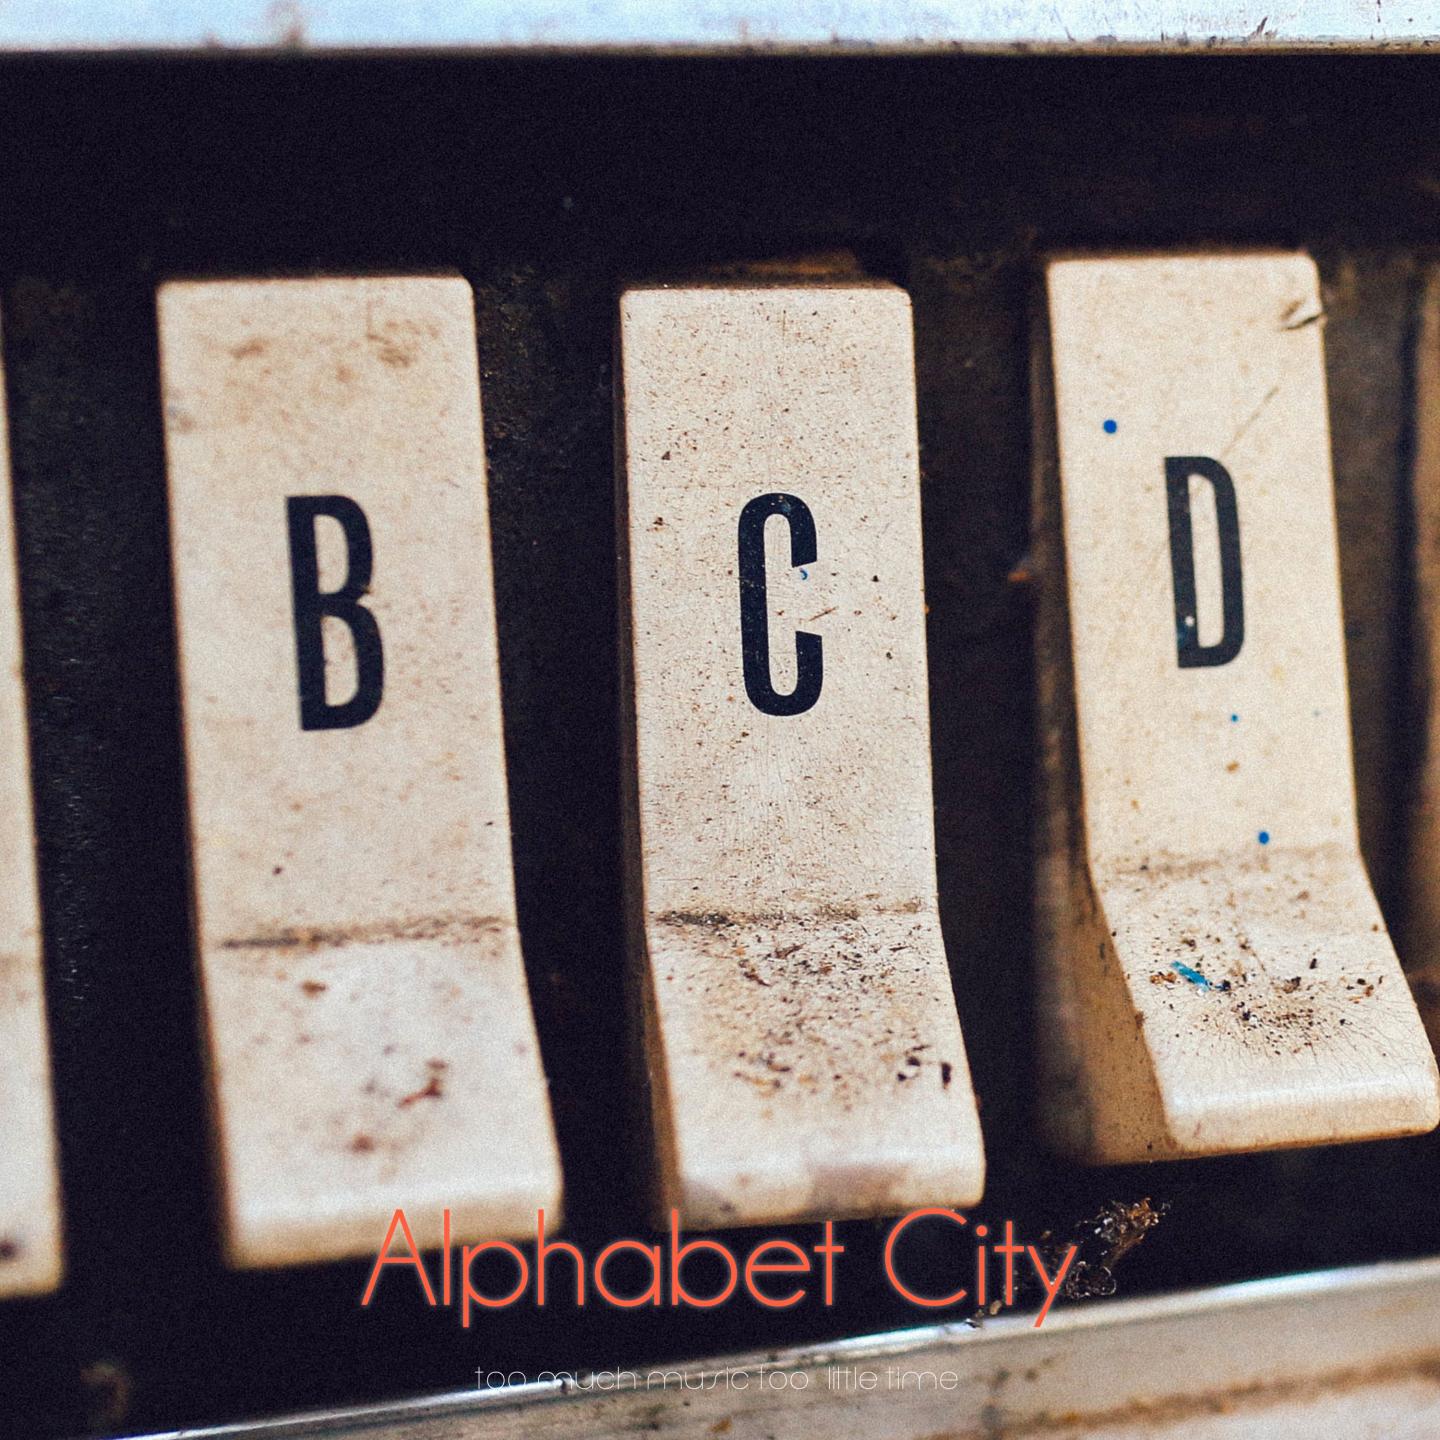 Alphabet City (So Much Music Too Little Time)